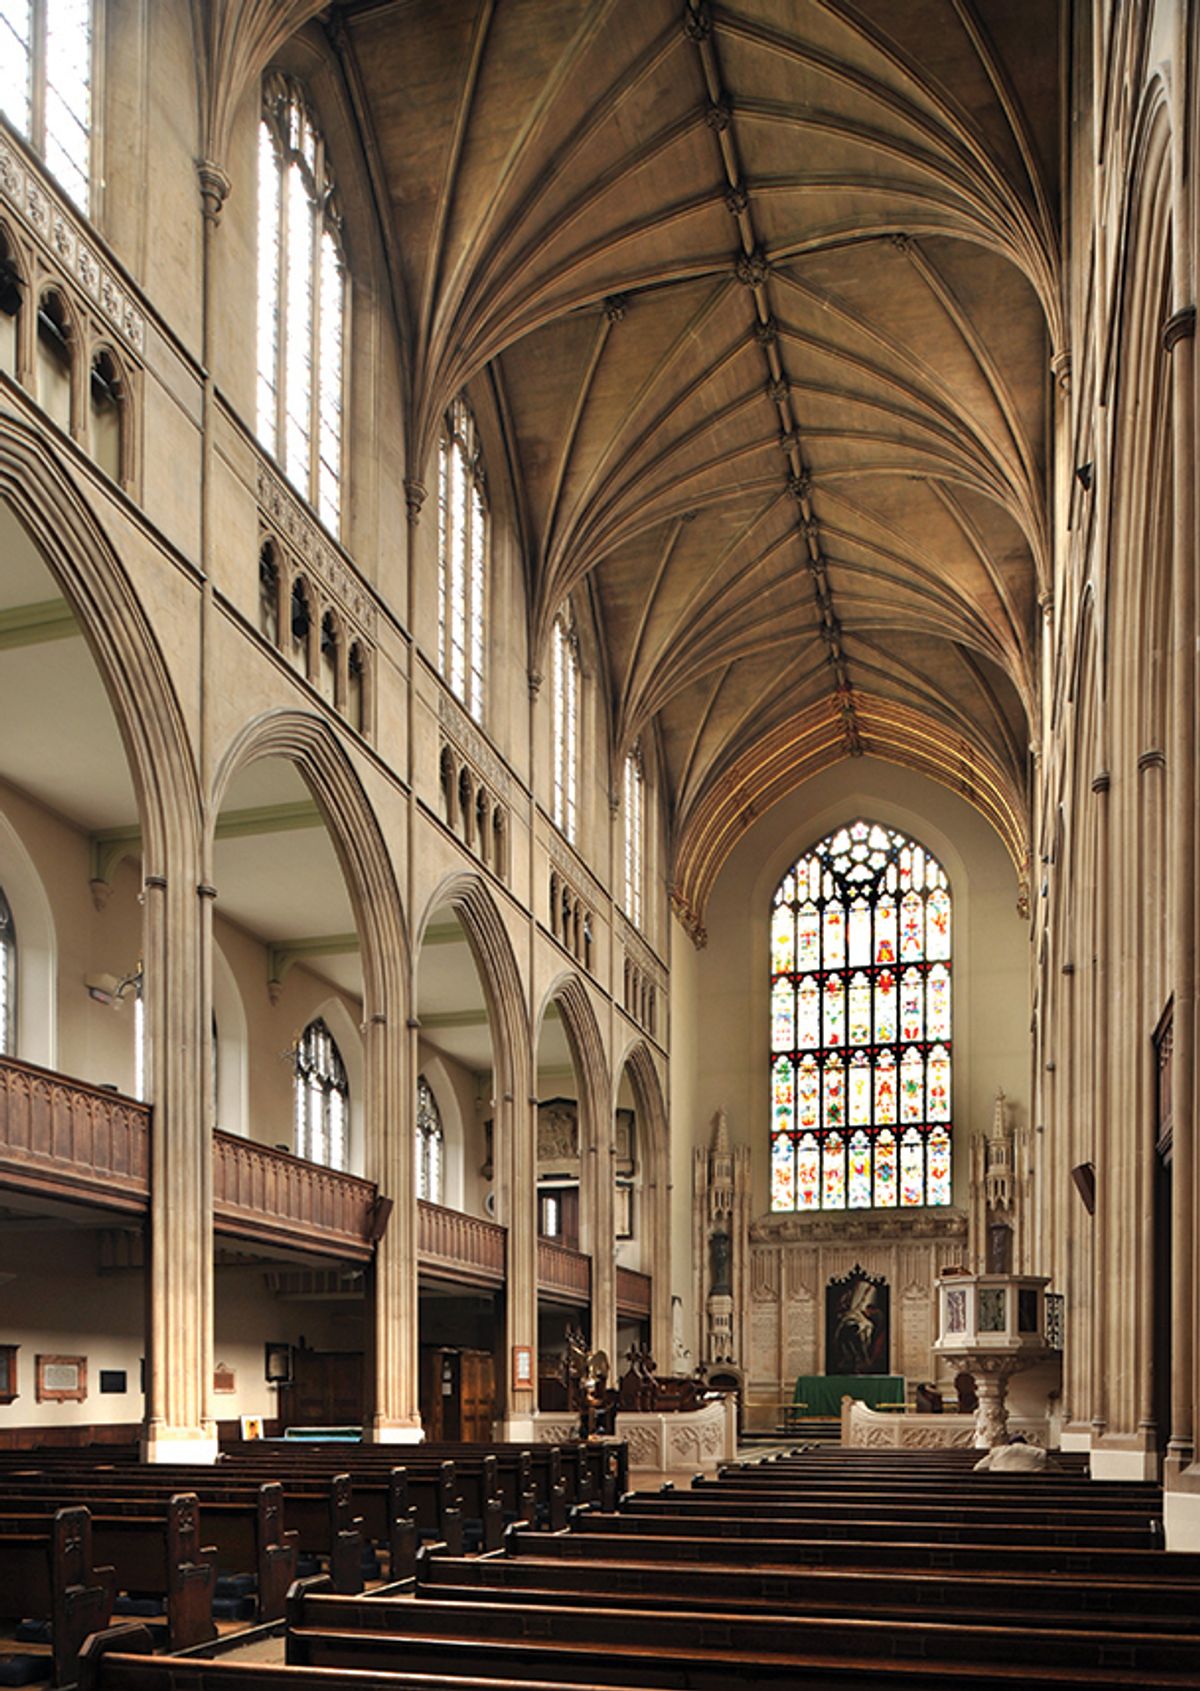 Interior of St Luke in Chelsea, London (1820-24), designed by James Savage